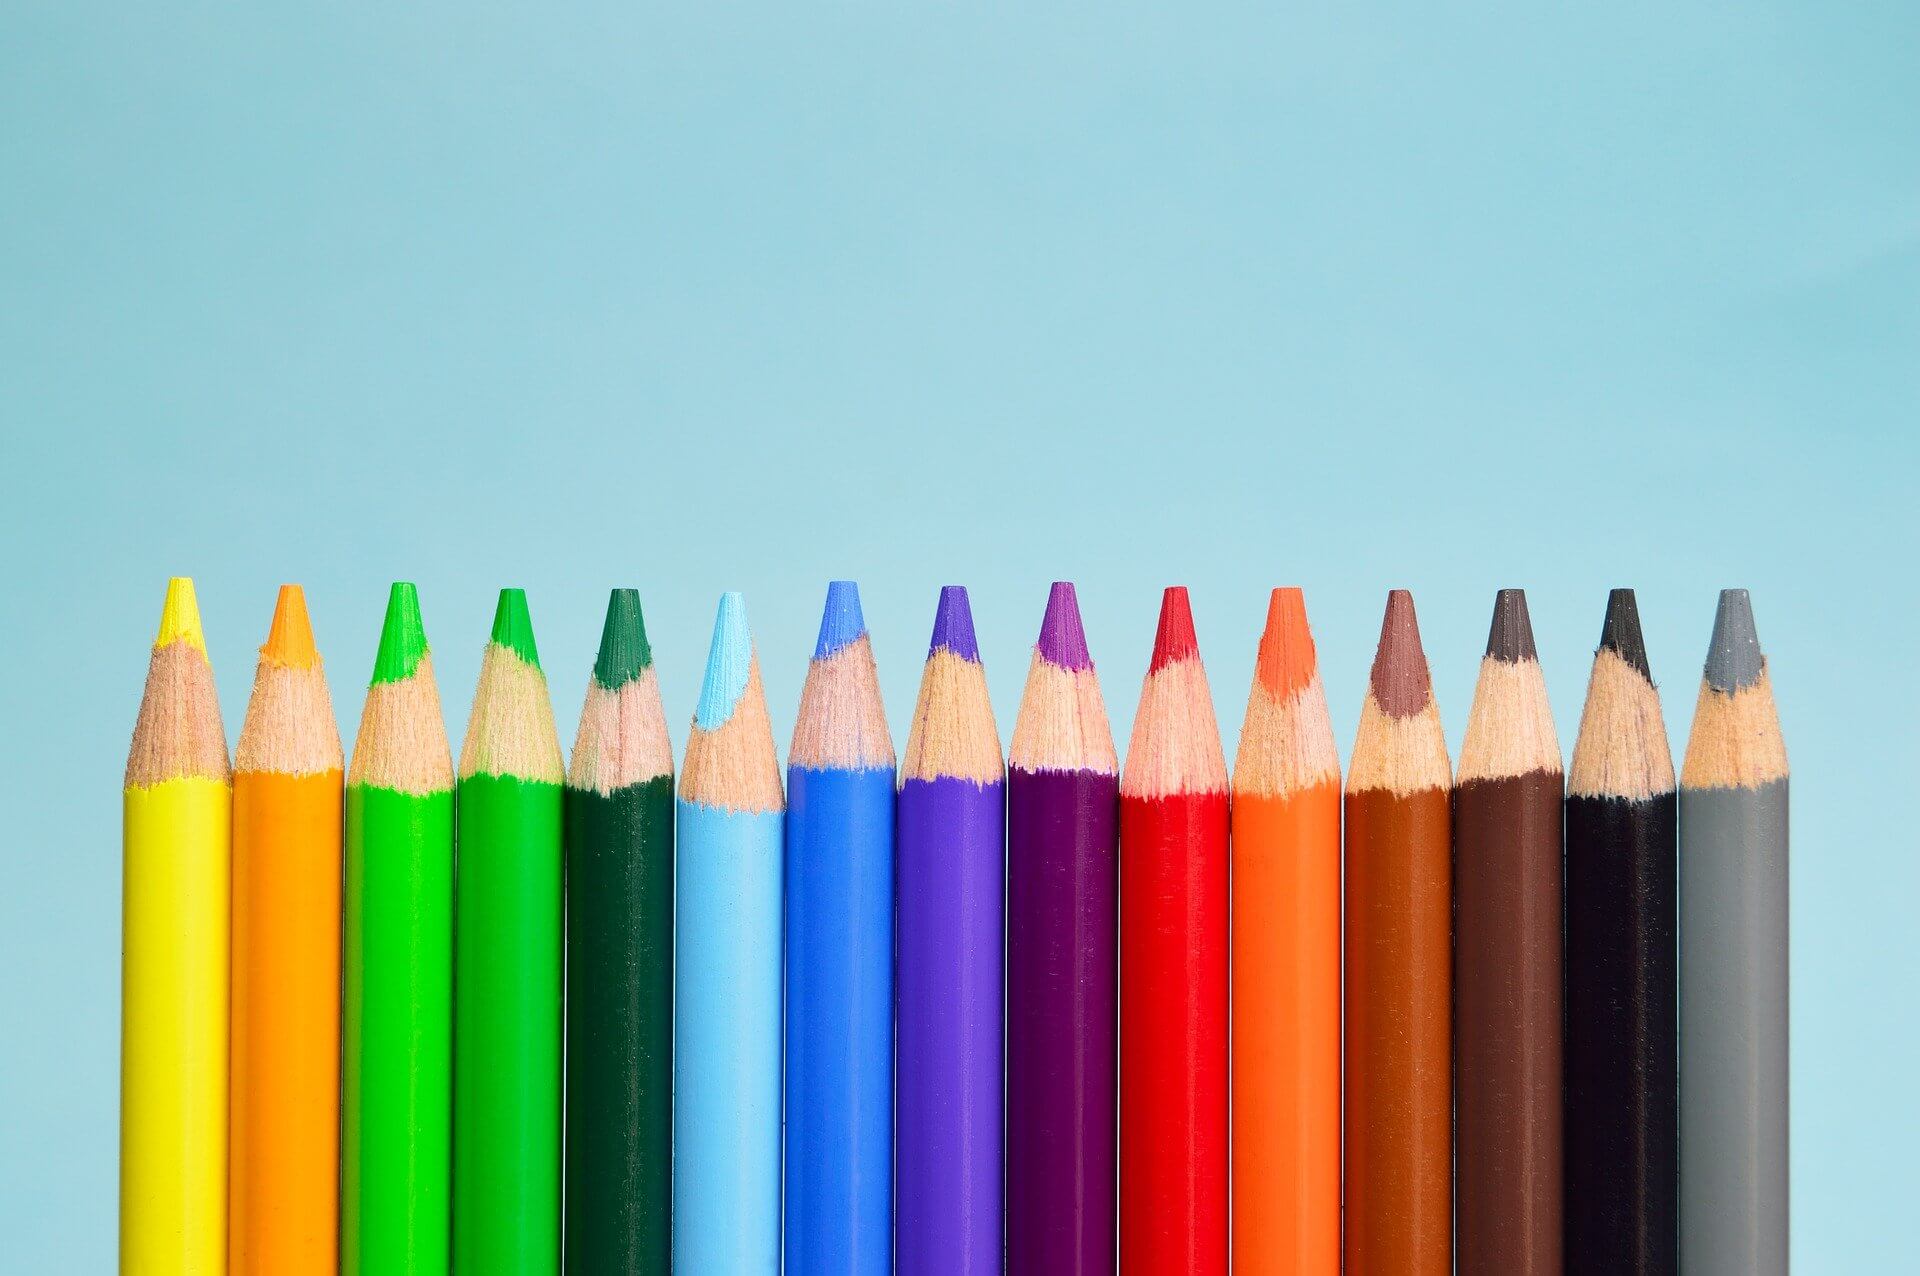 Coloured-pencils-on-a-blue-background-image-for-blog-feature